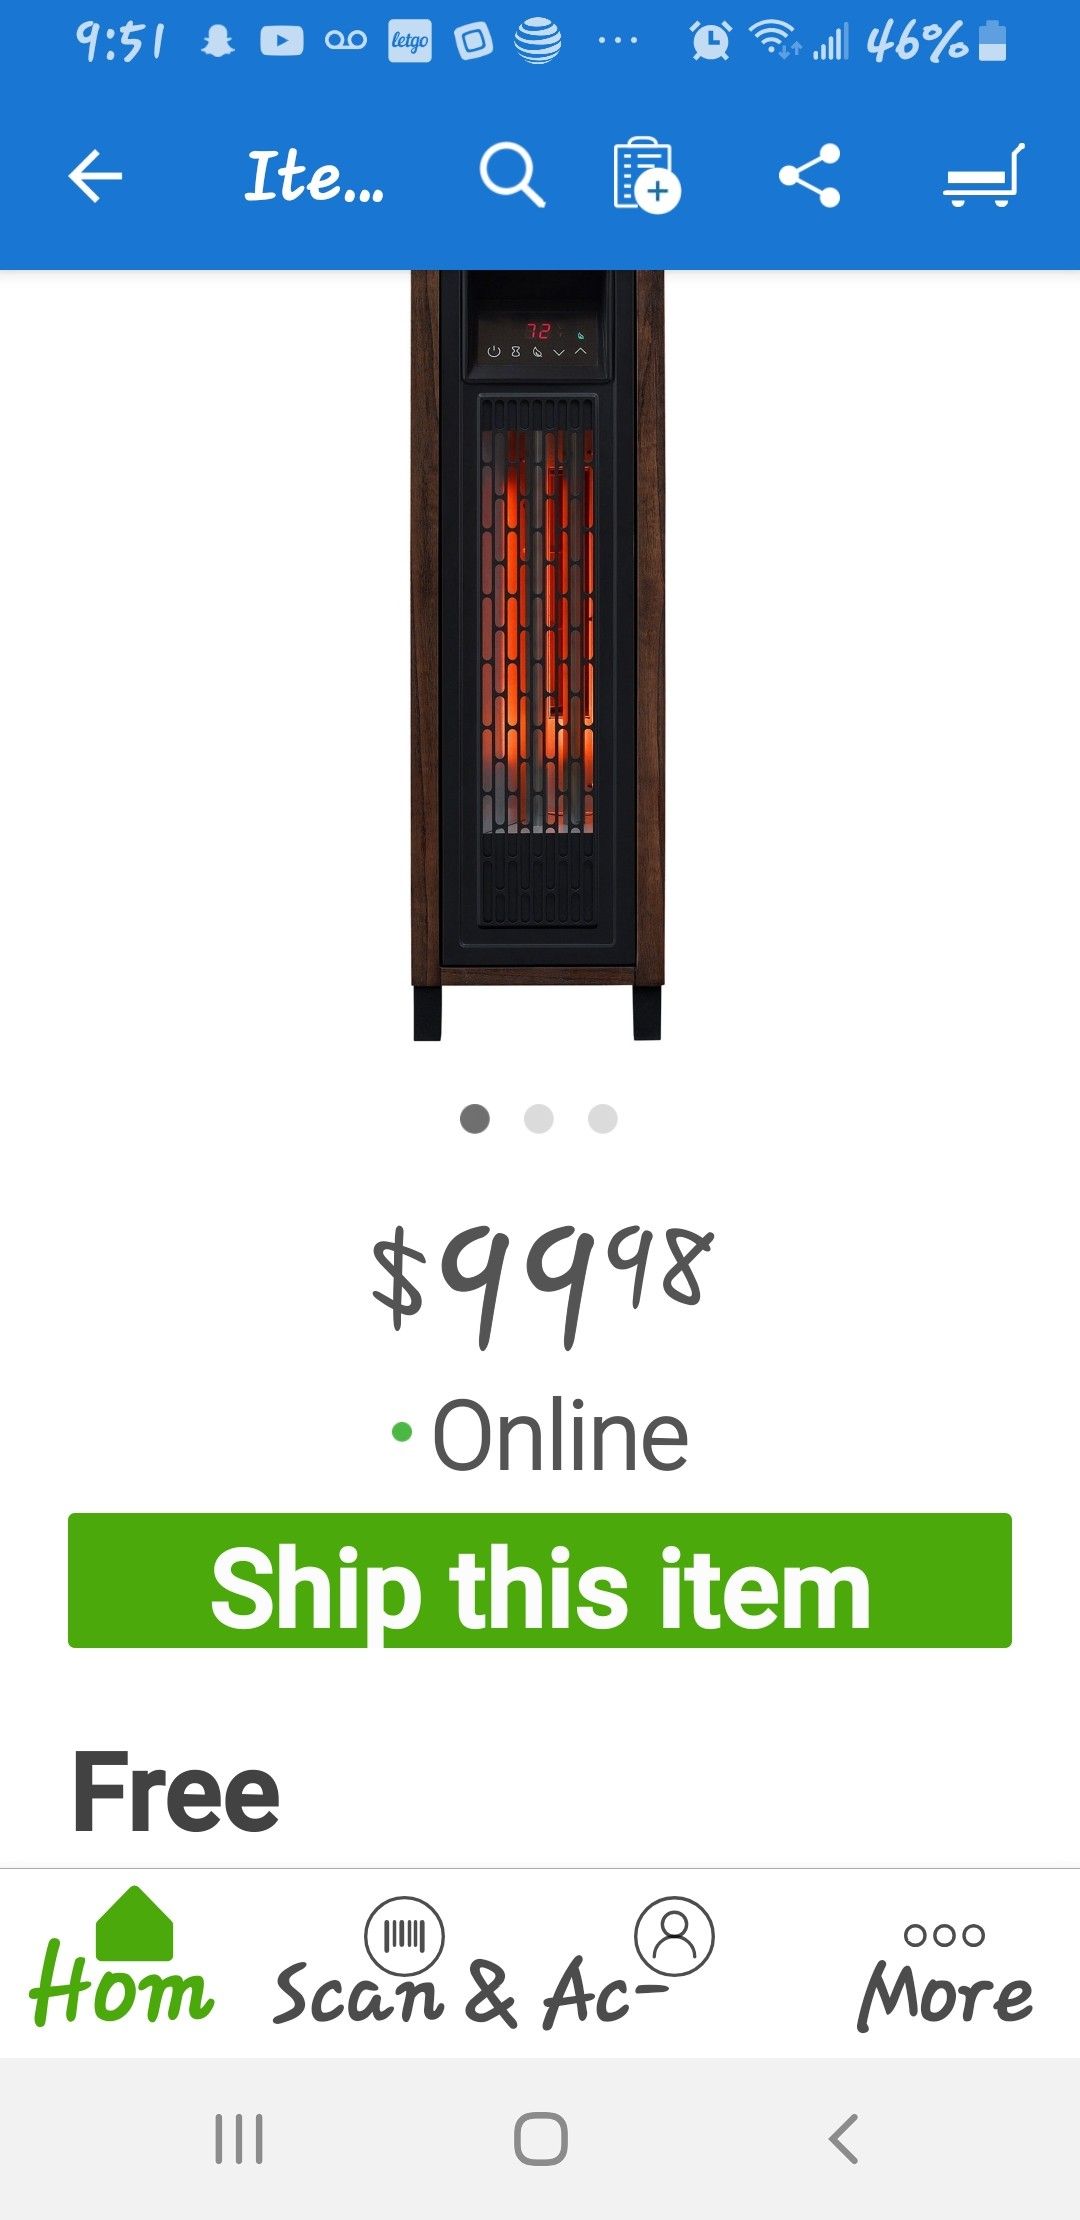 Electric Tower heater